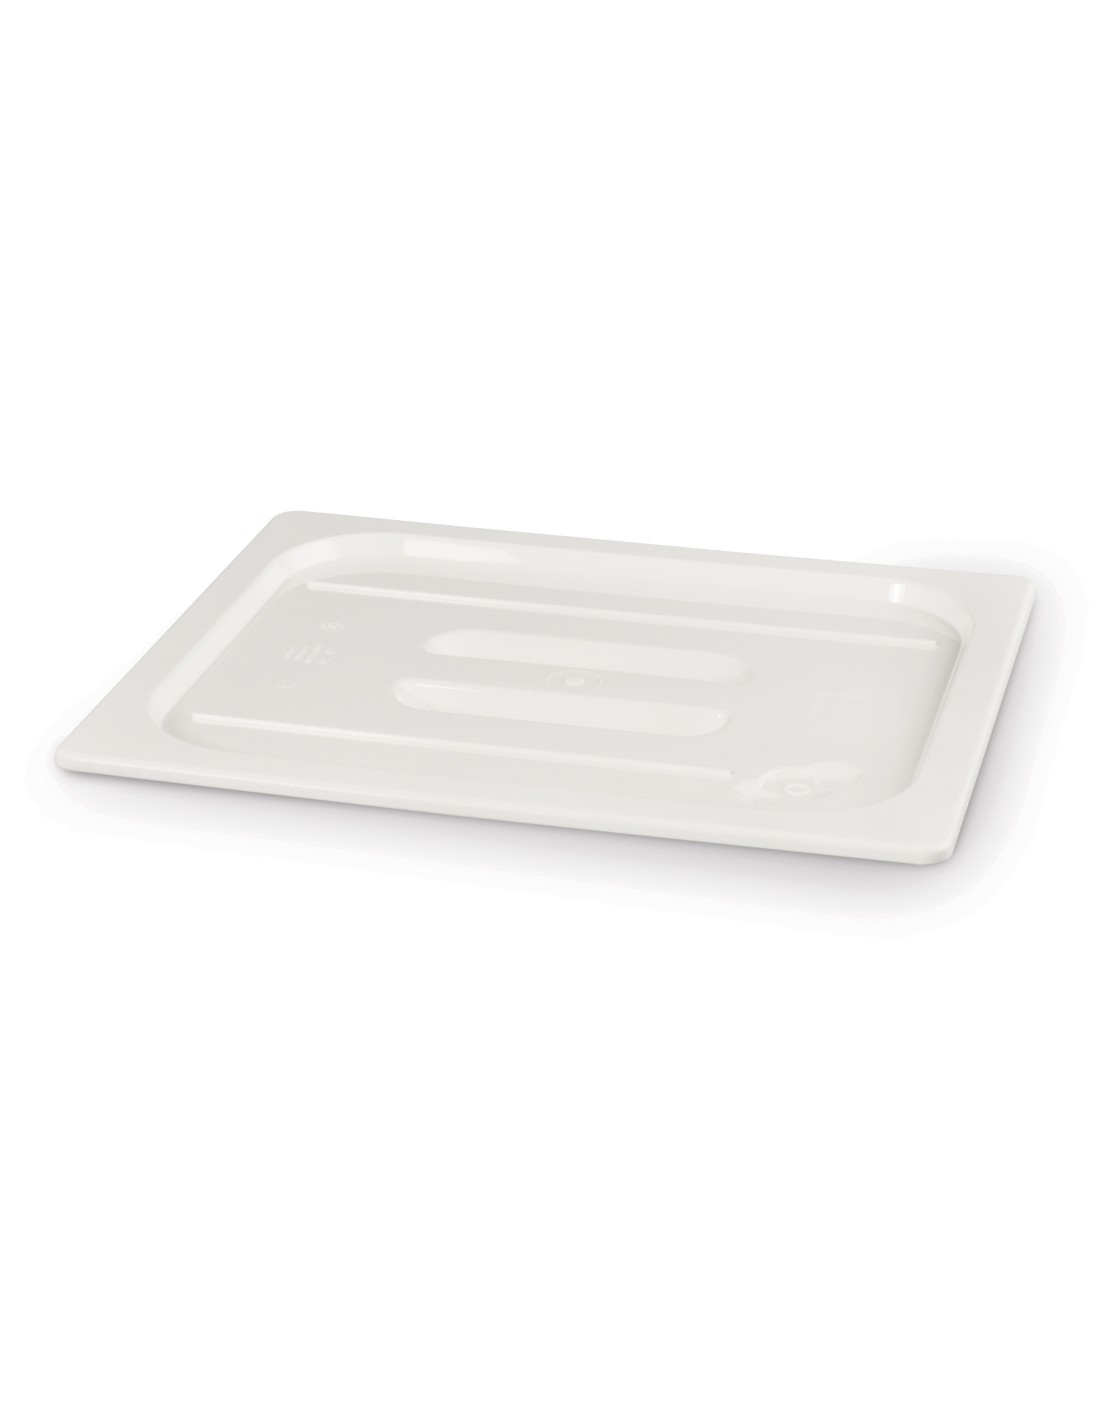 Lid for GN 1/2 trays - In white polycarbonate - mm 325 x 265